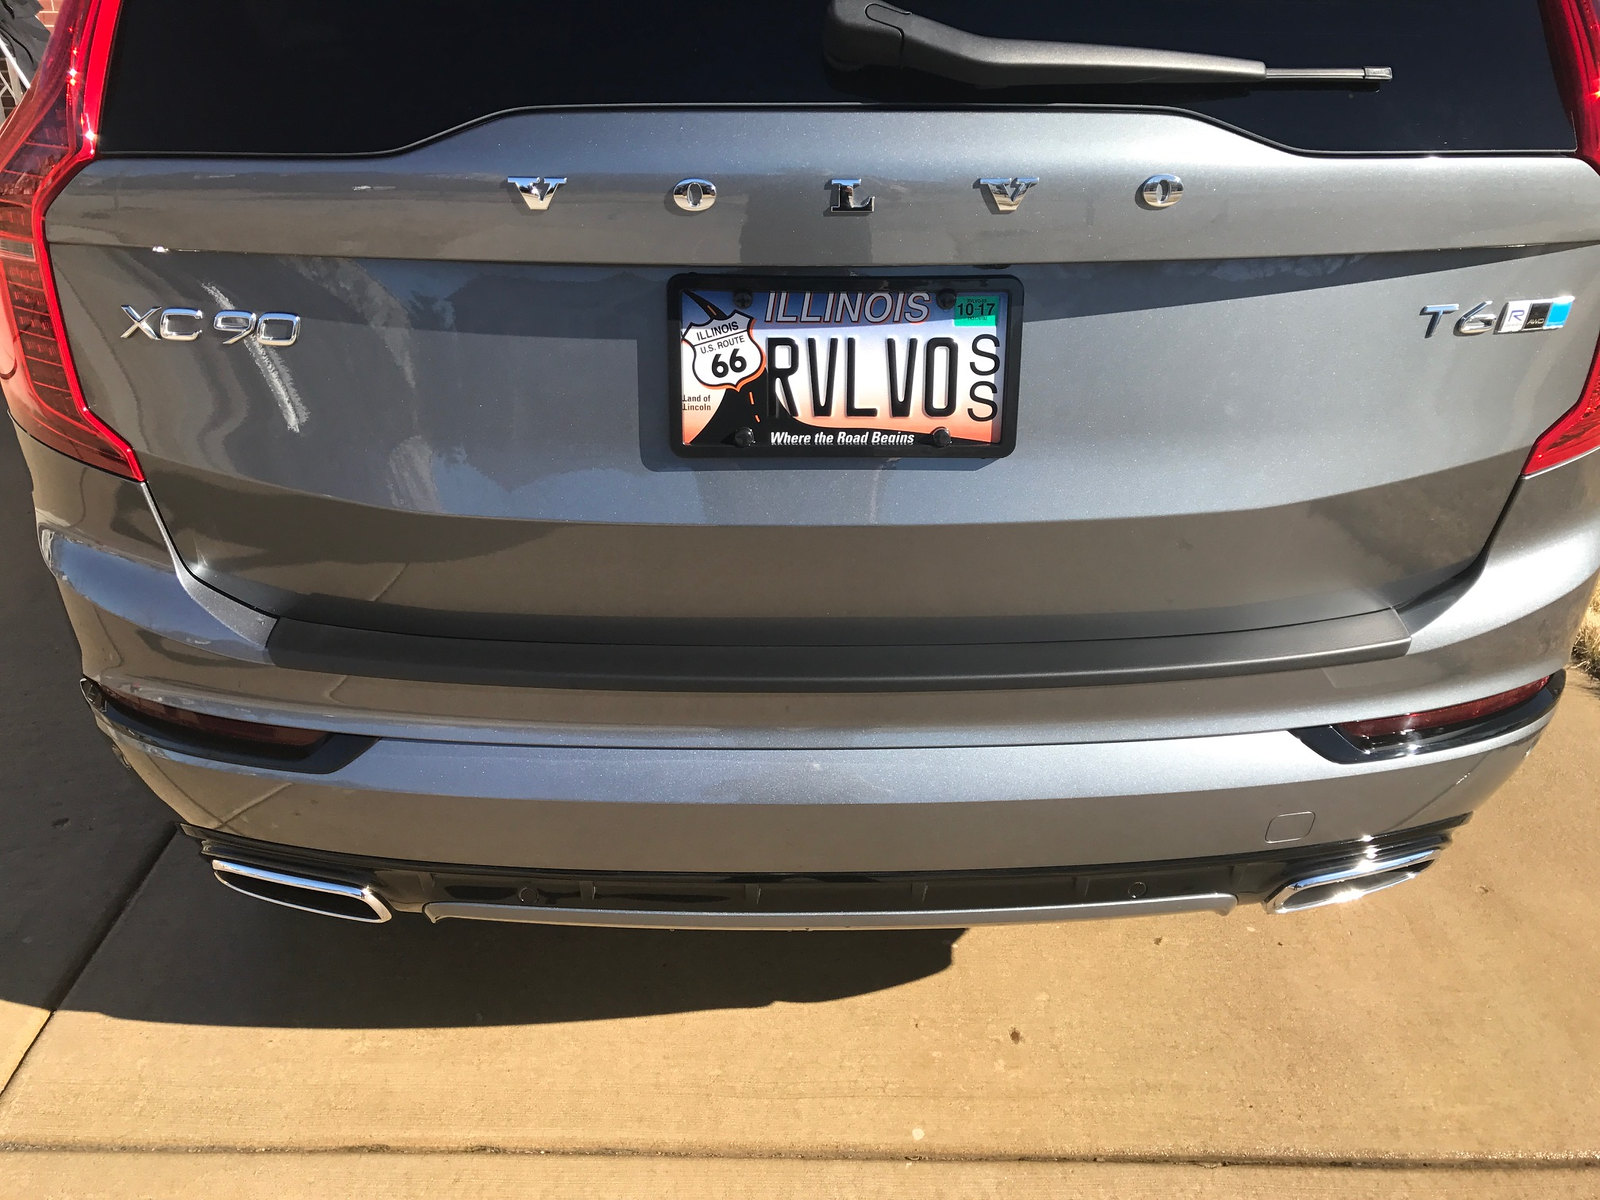 XC90 On Stainless Steel License Plate Frame W/ Bolt Caps